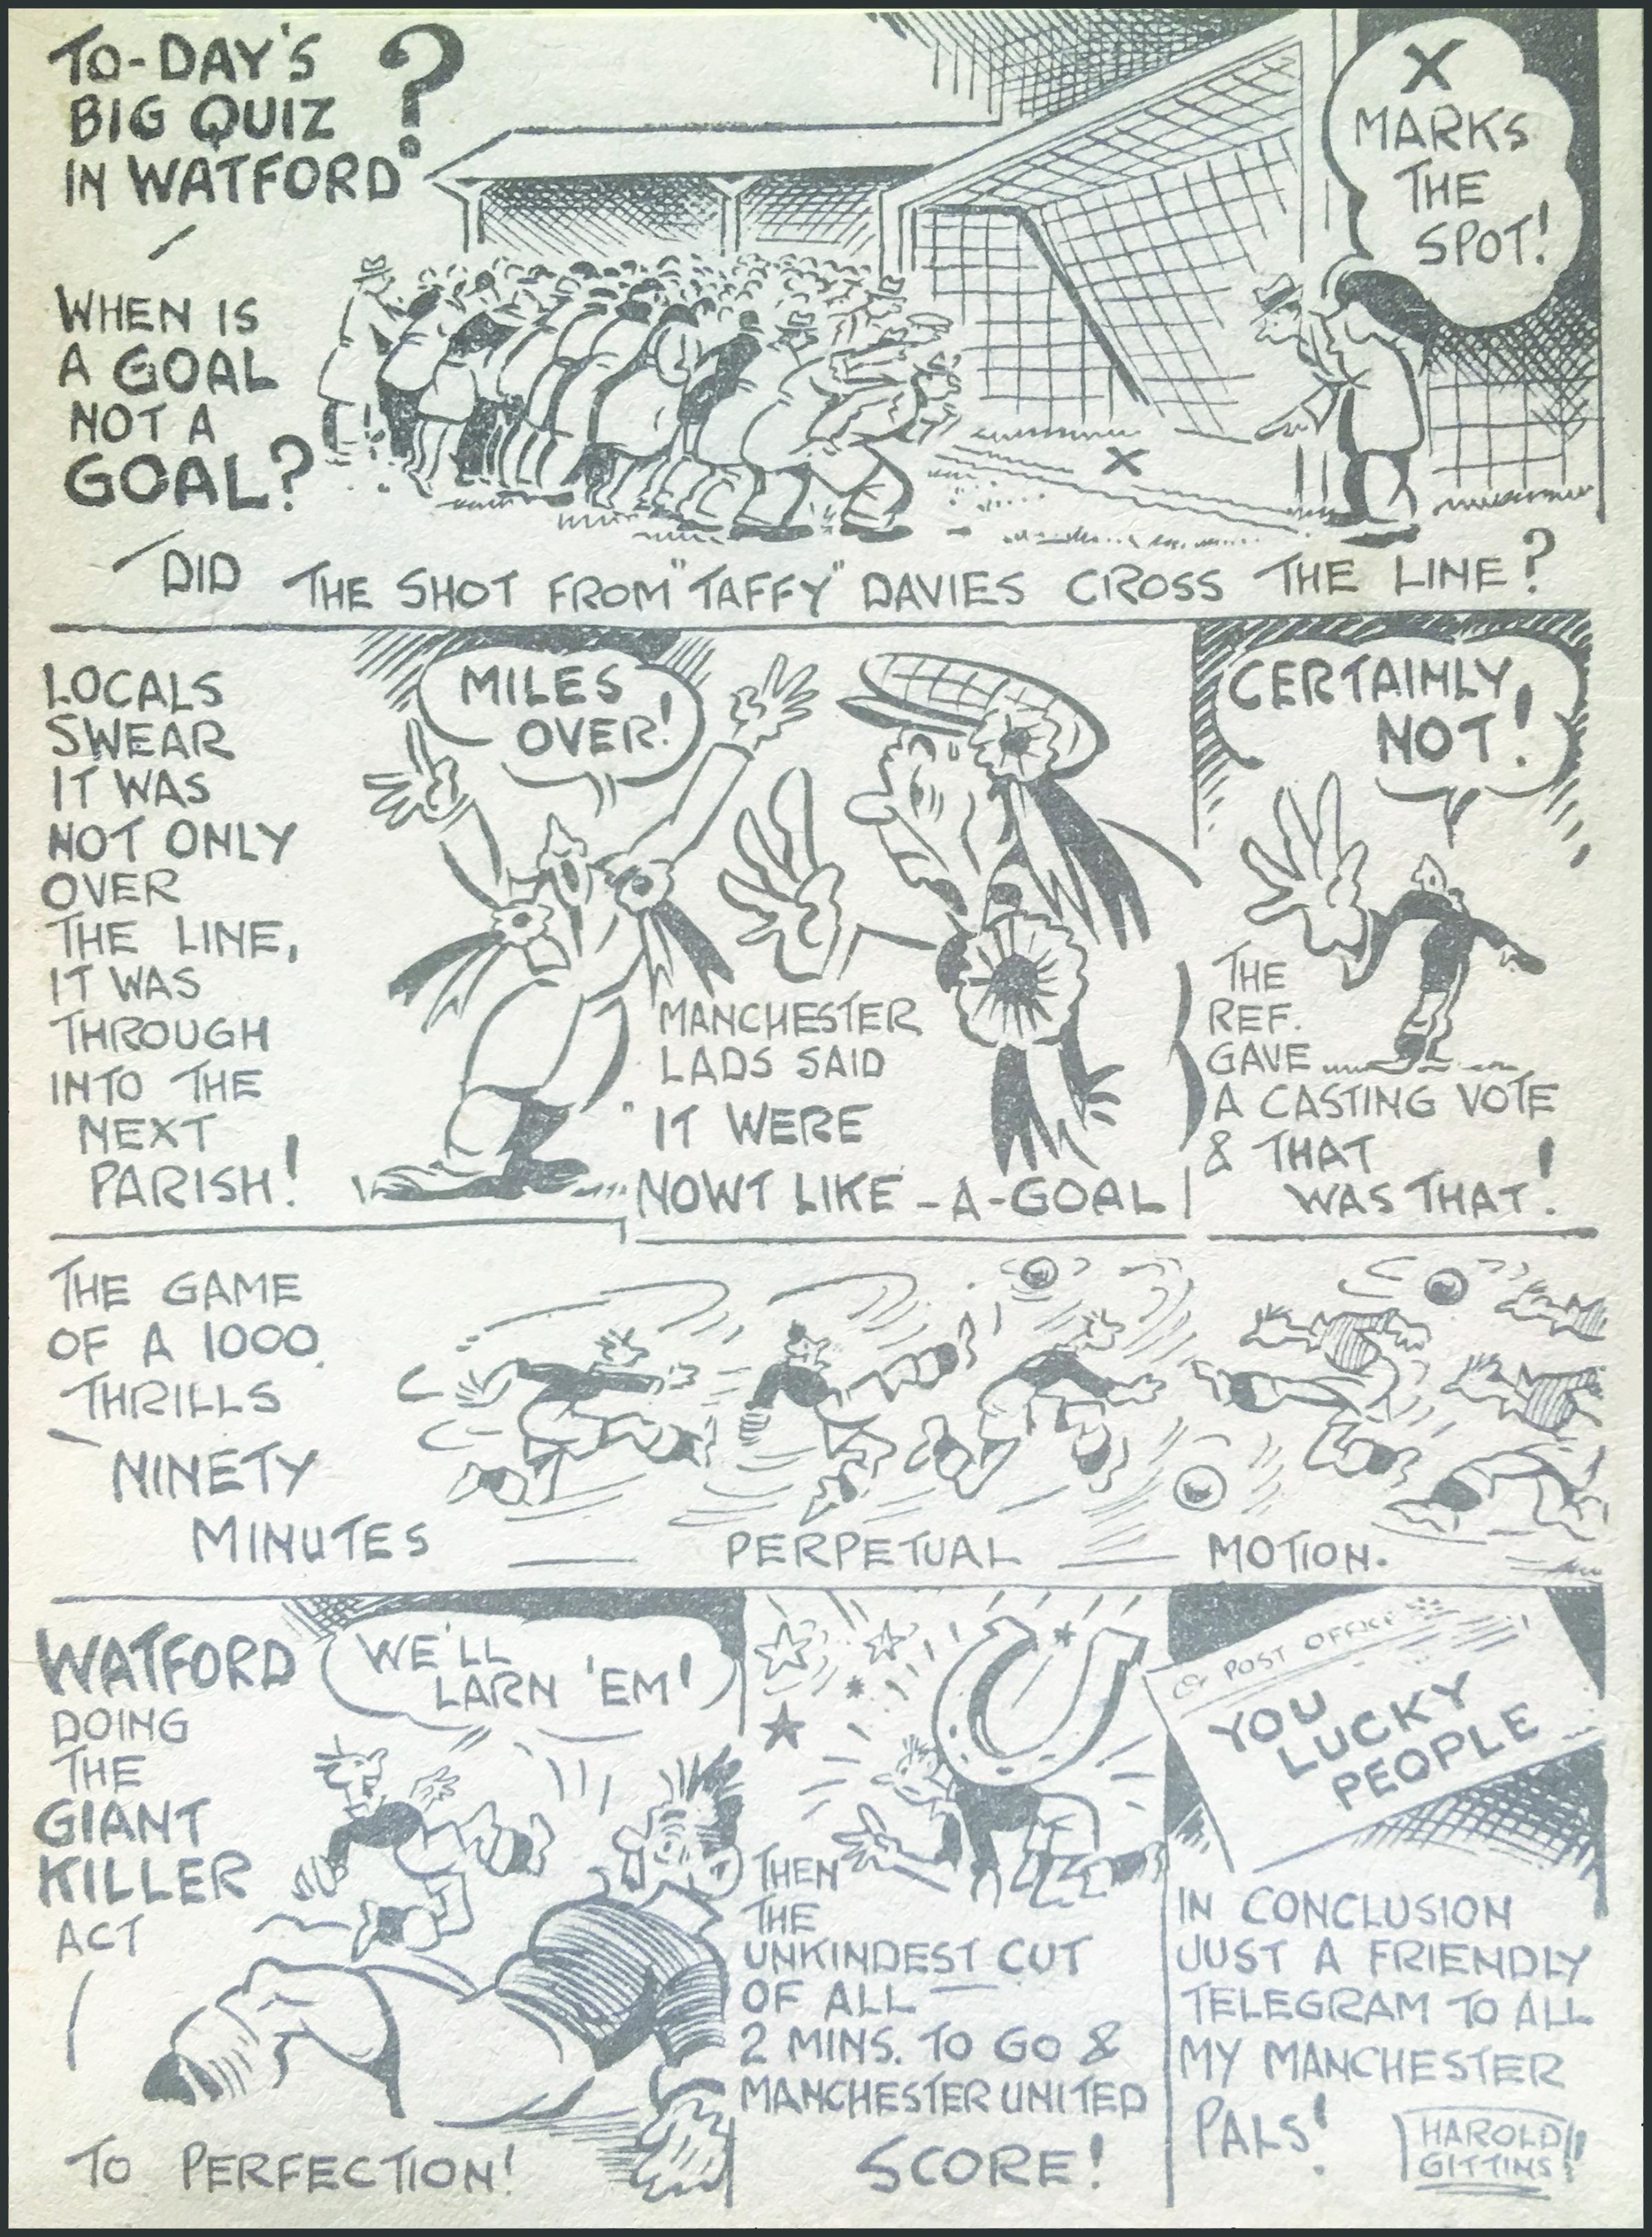 The Watford Observer published a cartoon reflecting on Taffy Davies goal that was disallowed